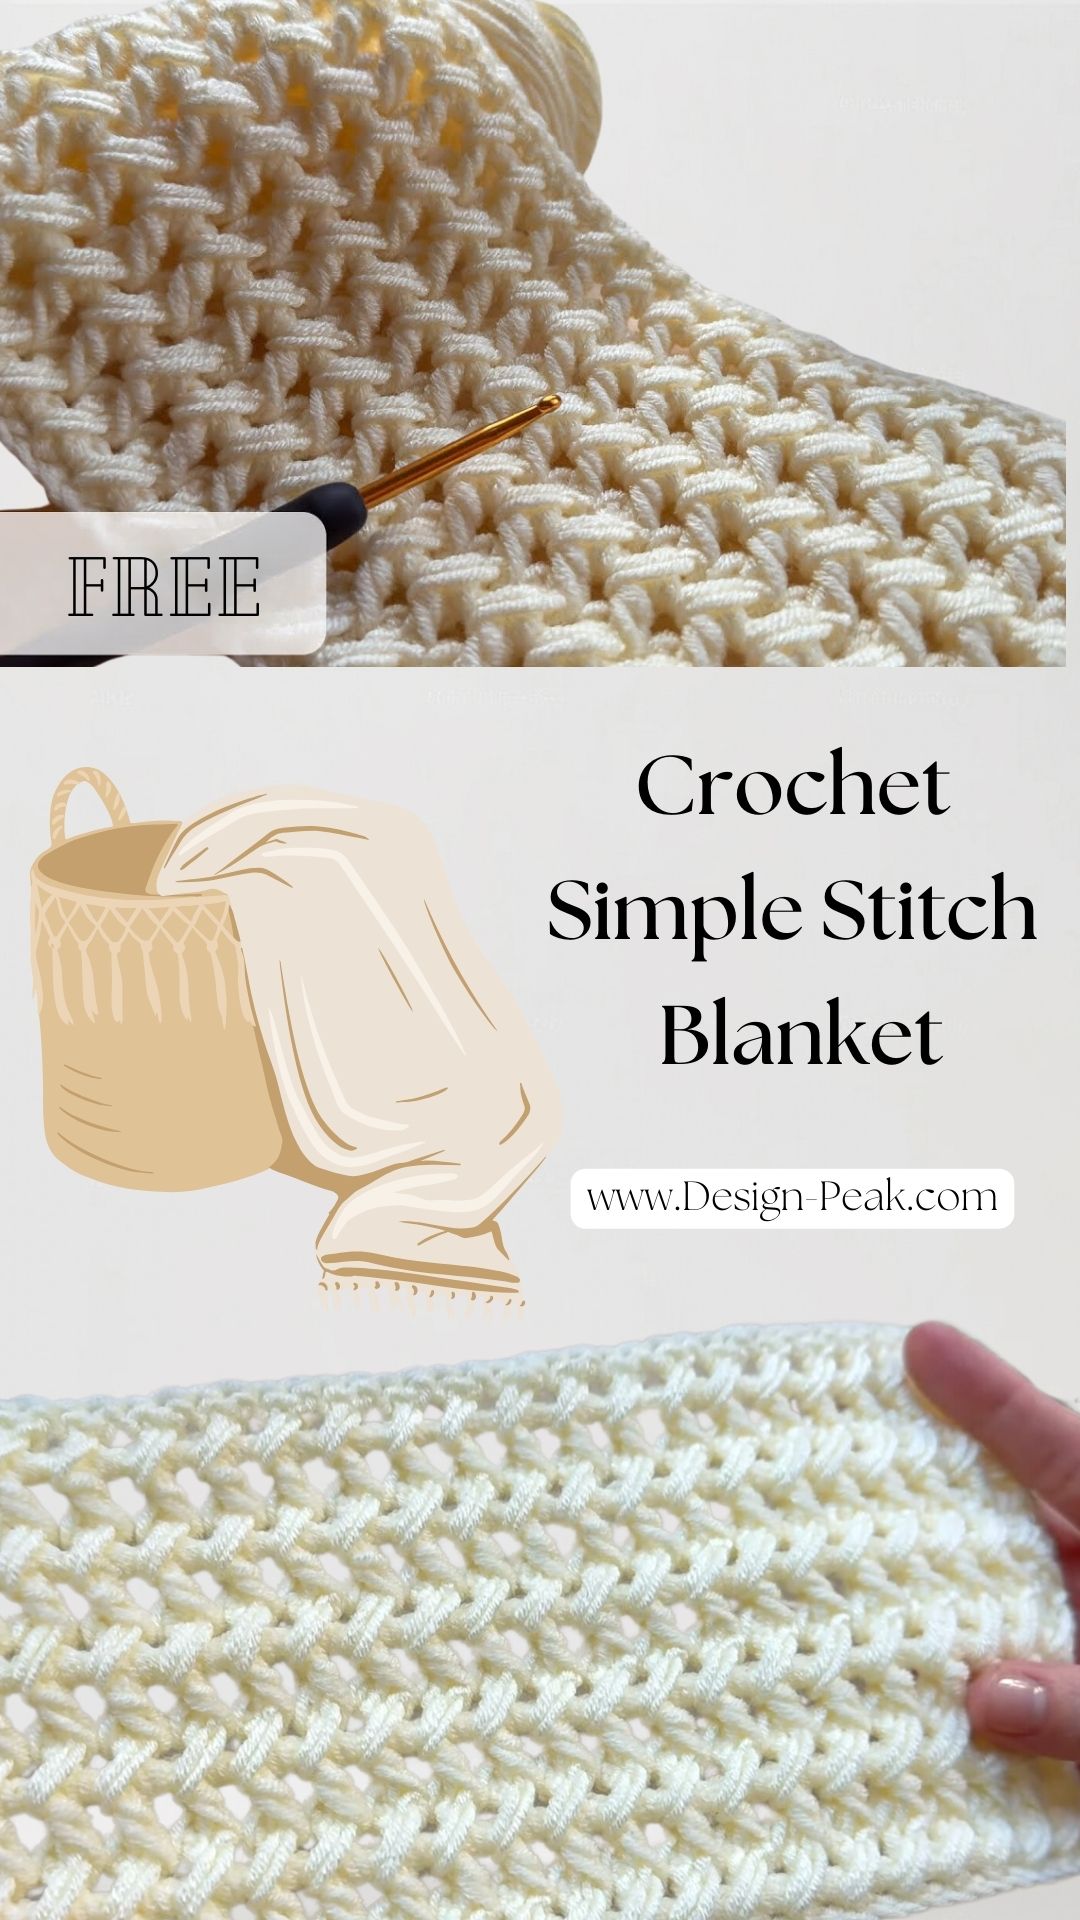 Simple Stitch Blanket to Crochet